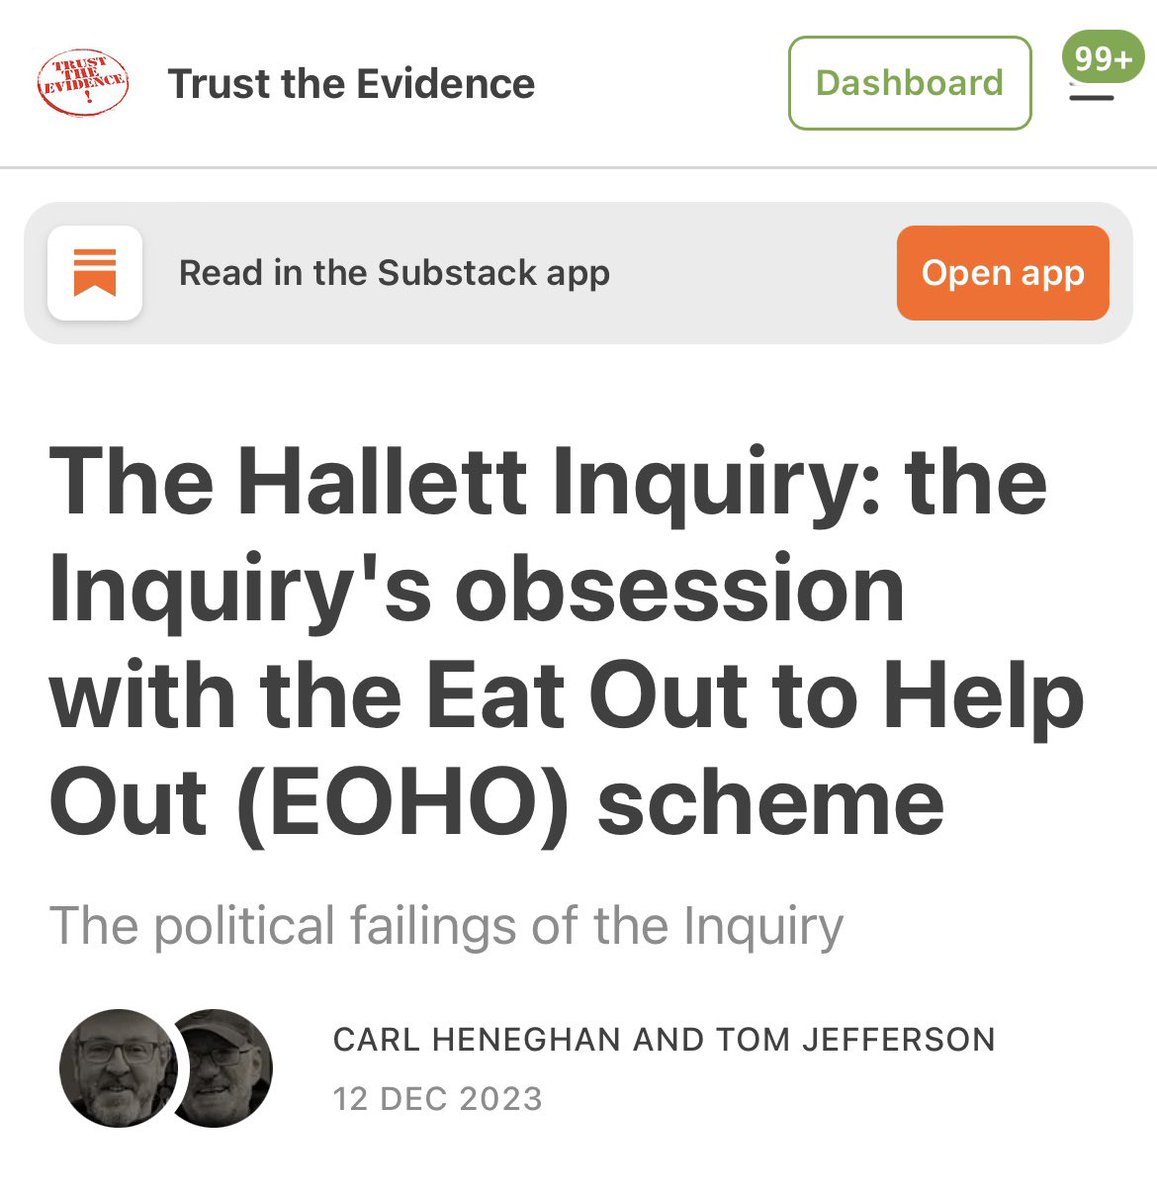 The Hallett Inquiry: the Inquiry's obsession with the Eat Out to Help Out (EOHO) scheme The political failings of the Inquiry trusttheevidence.substack.com